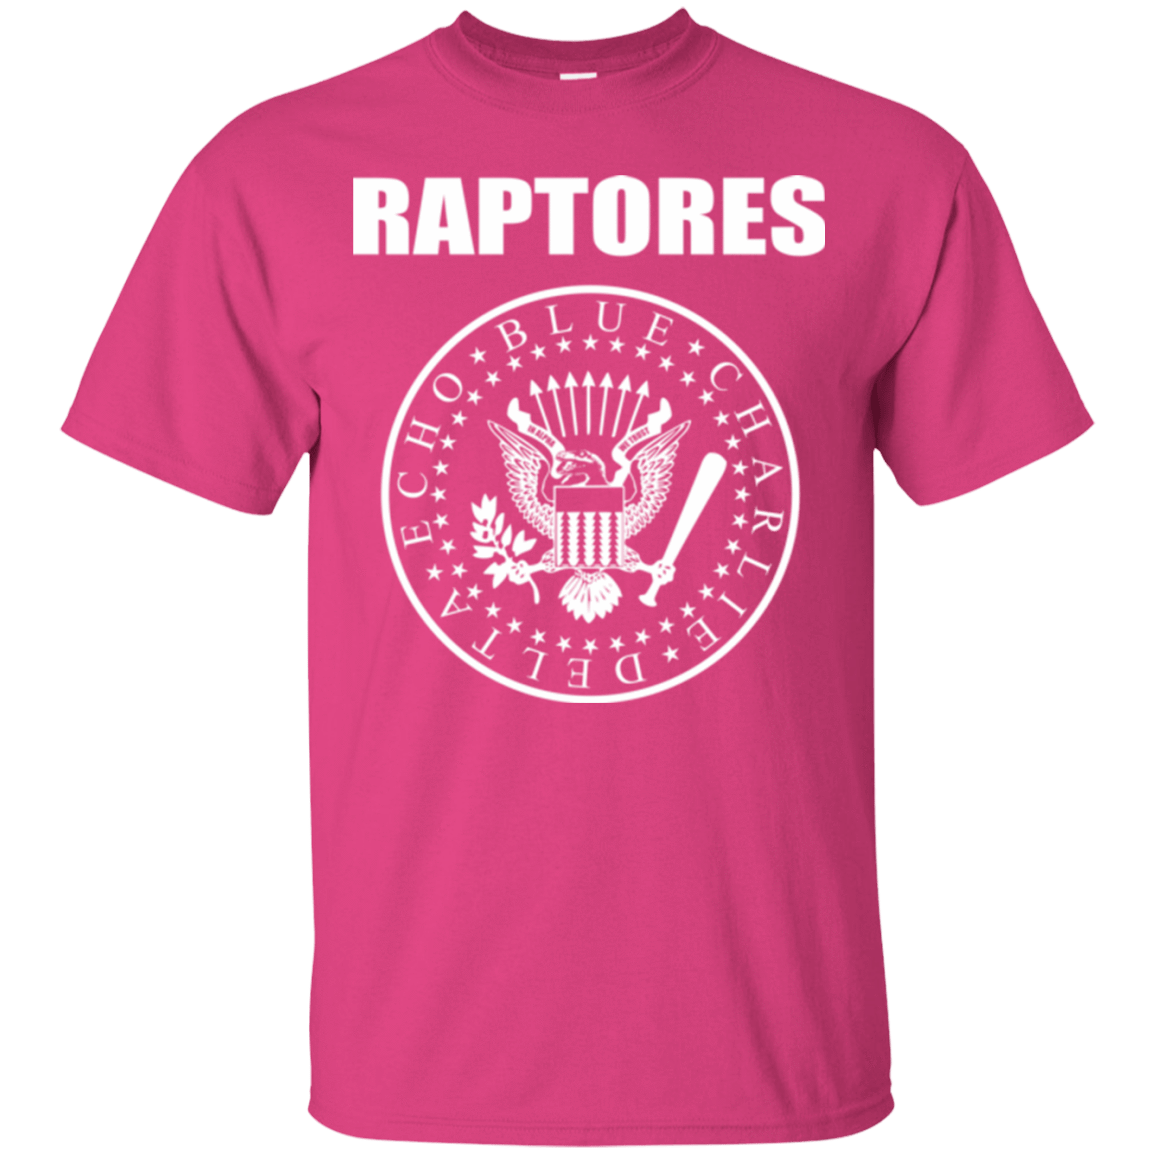 T-Shirts Heliconia / Small Raptores T-Shirt